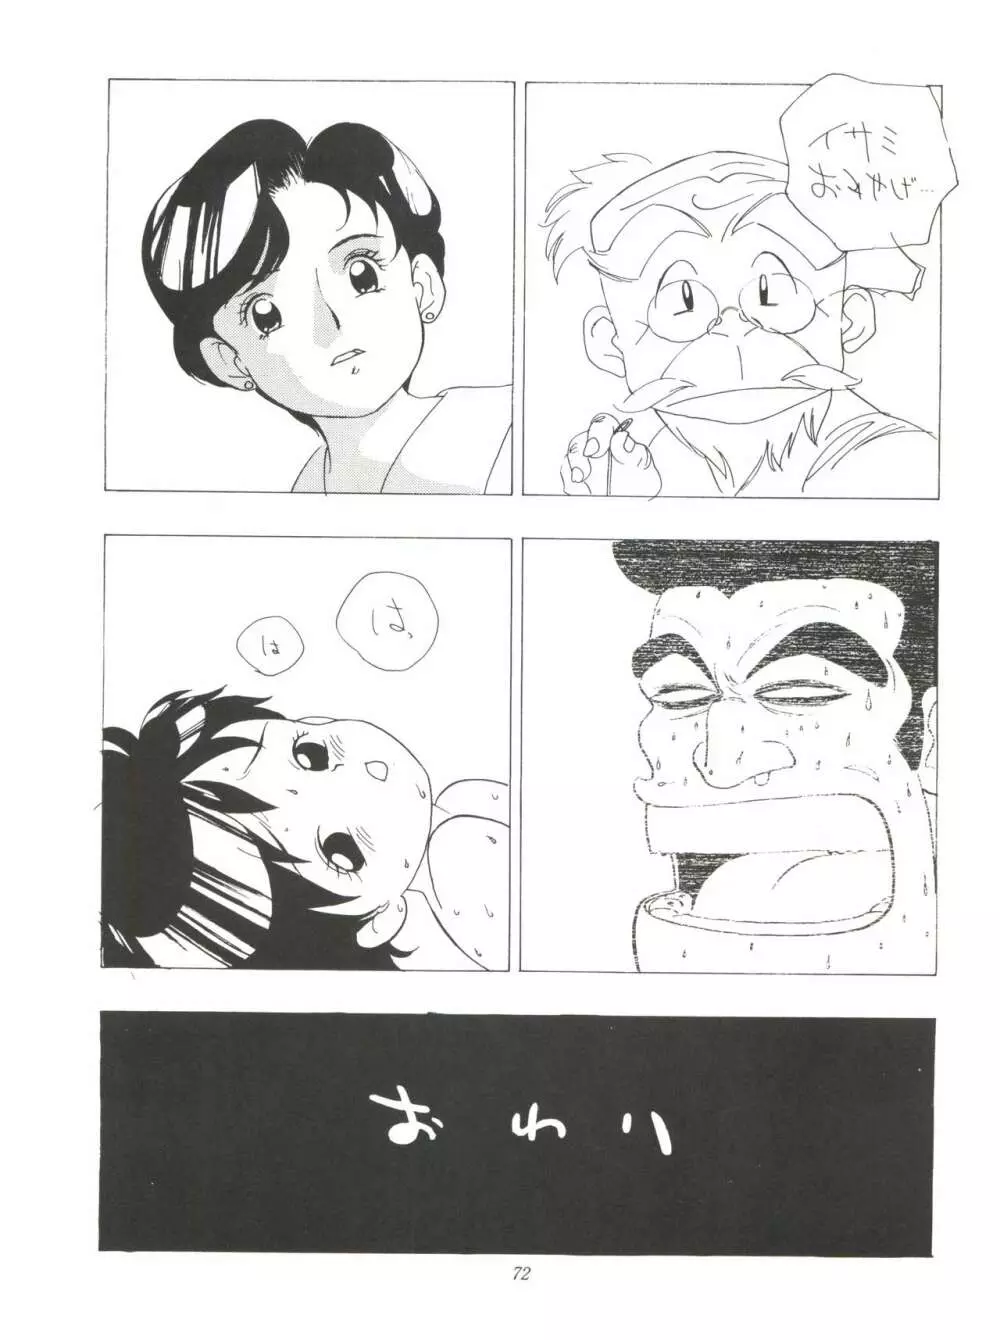 FLY! ISAMI!! - page76